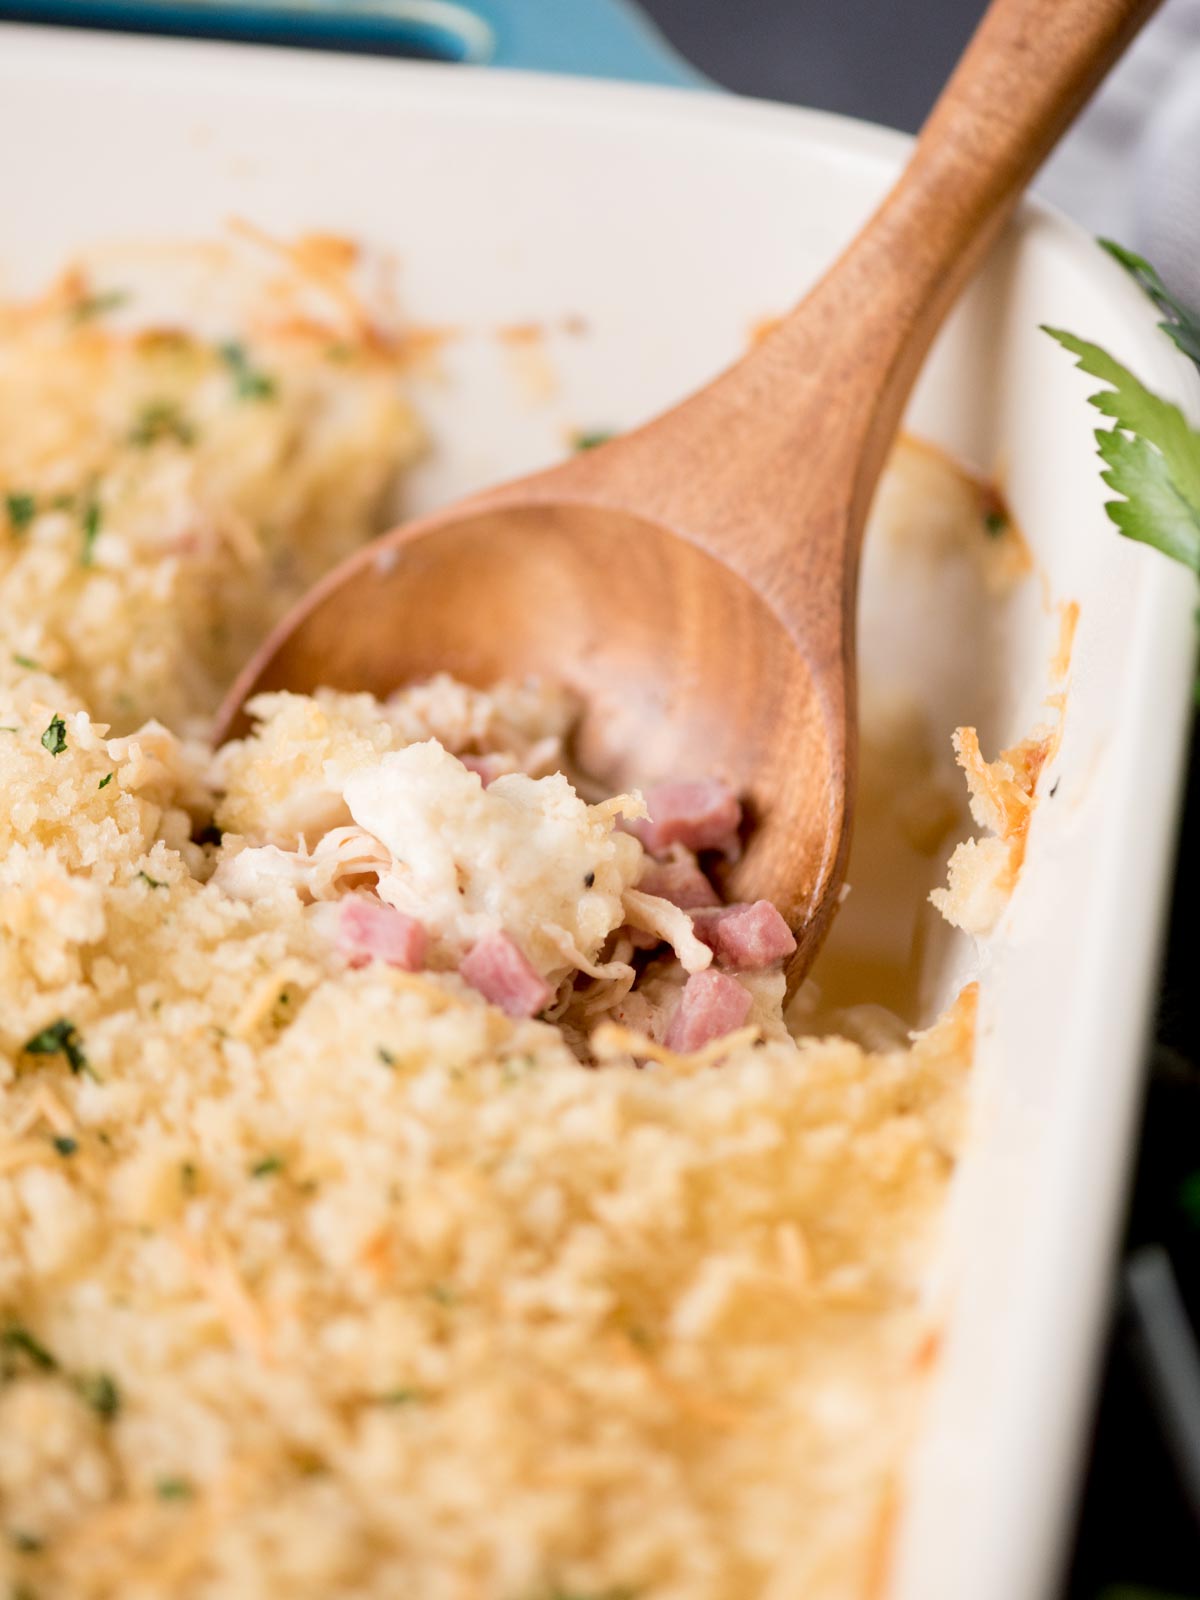 chicken cordon bleu casserole in a baking dish with a serving spoon inside. It is surrounded by fresh parsley and a kitchen towel.